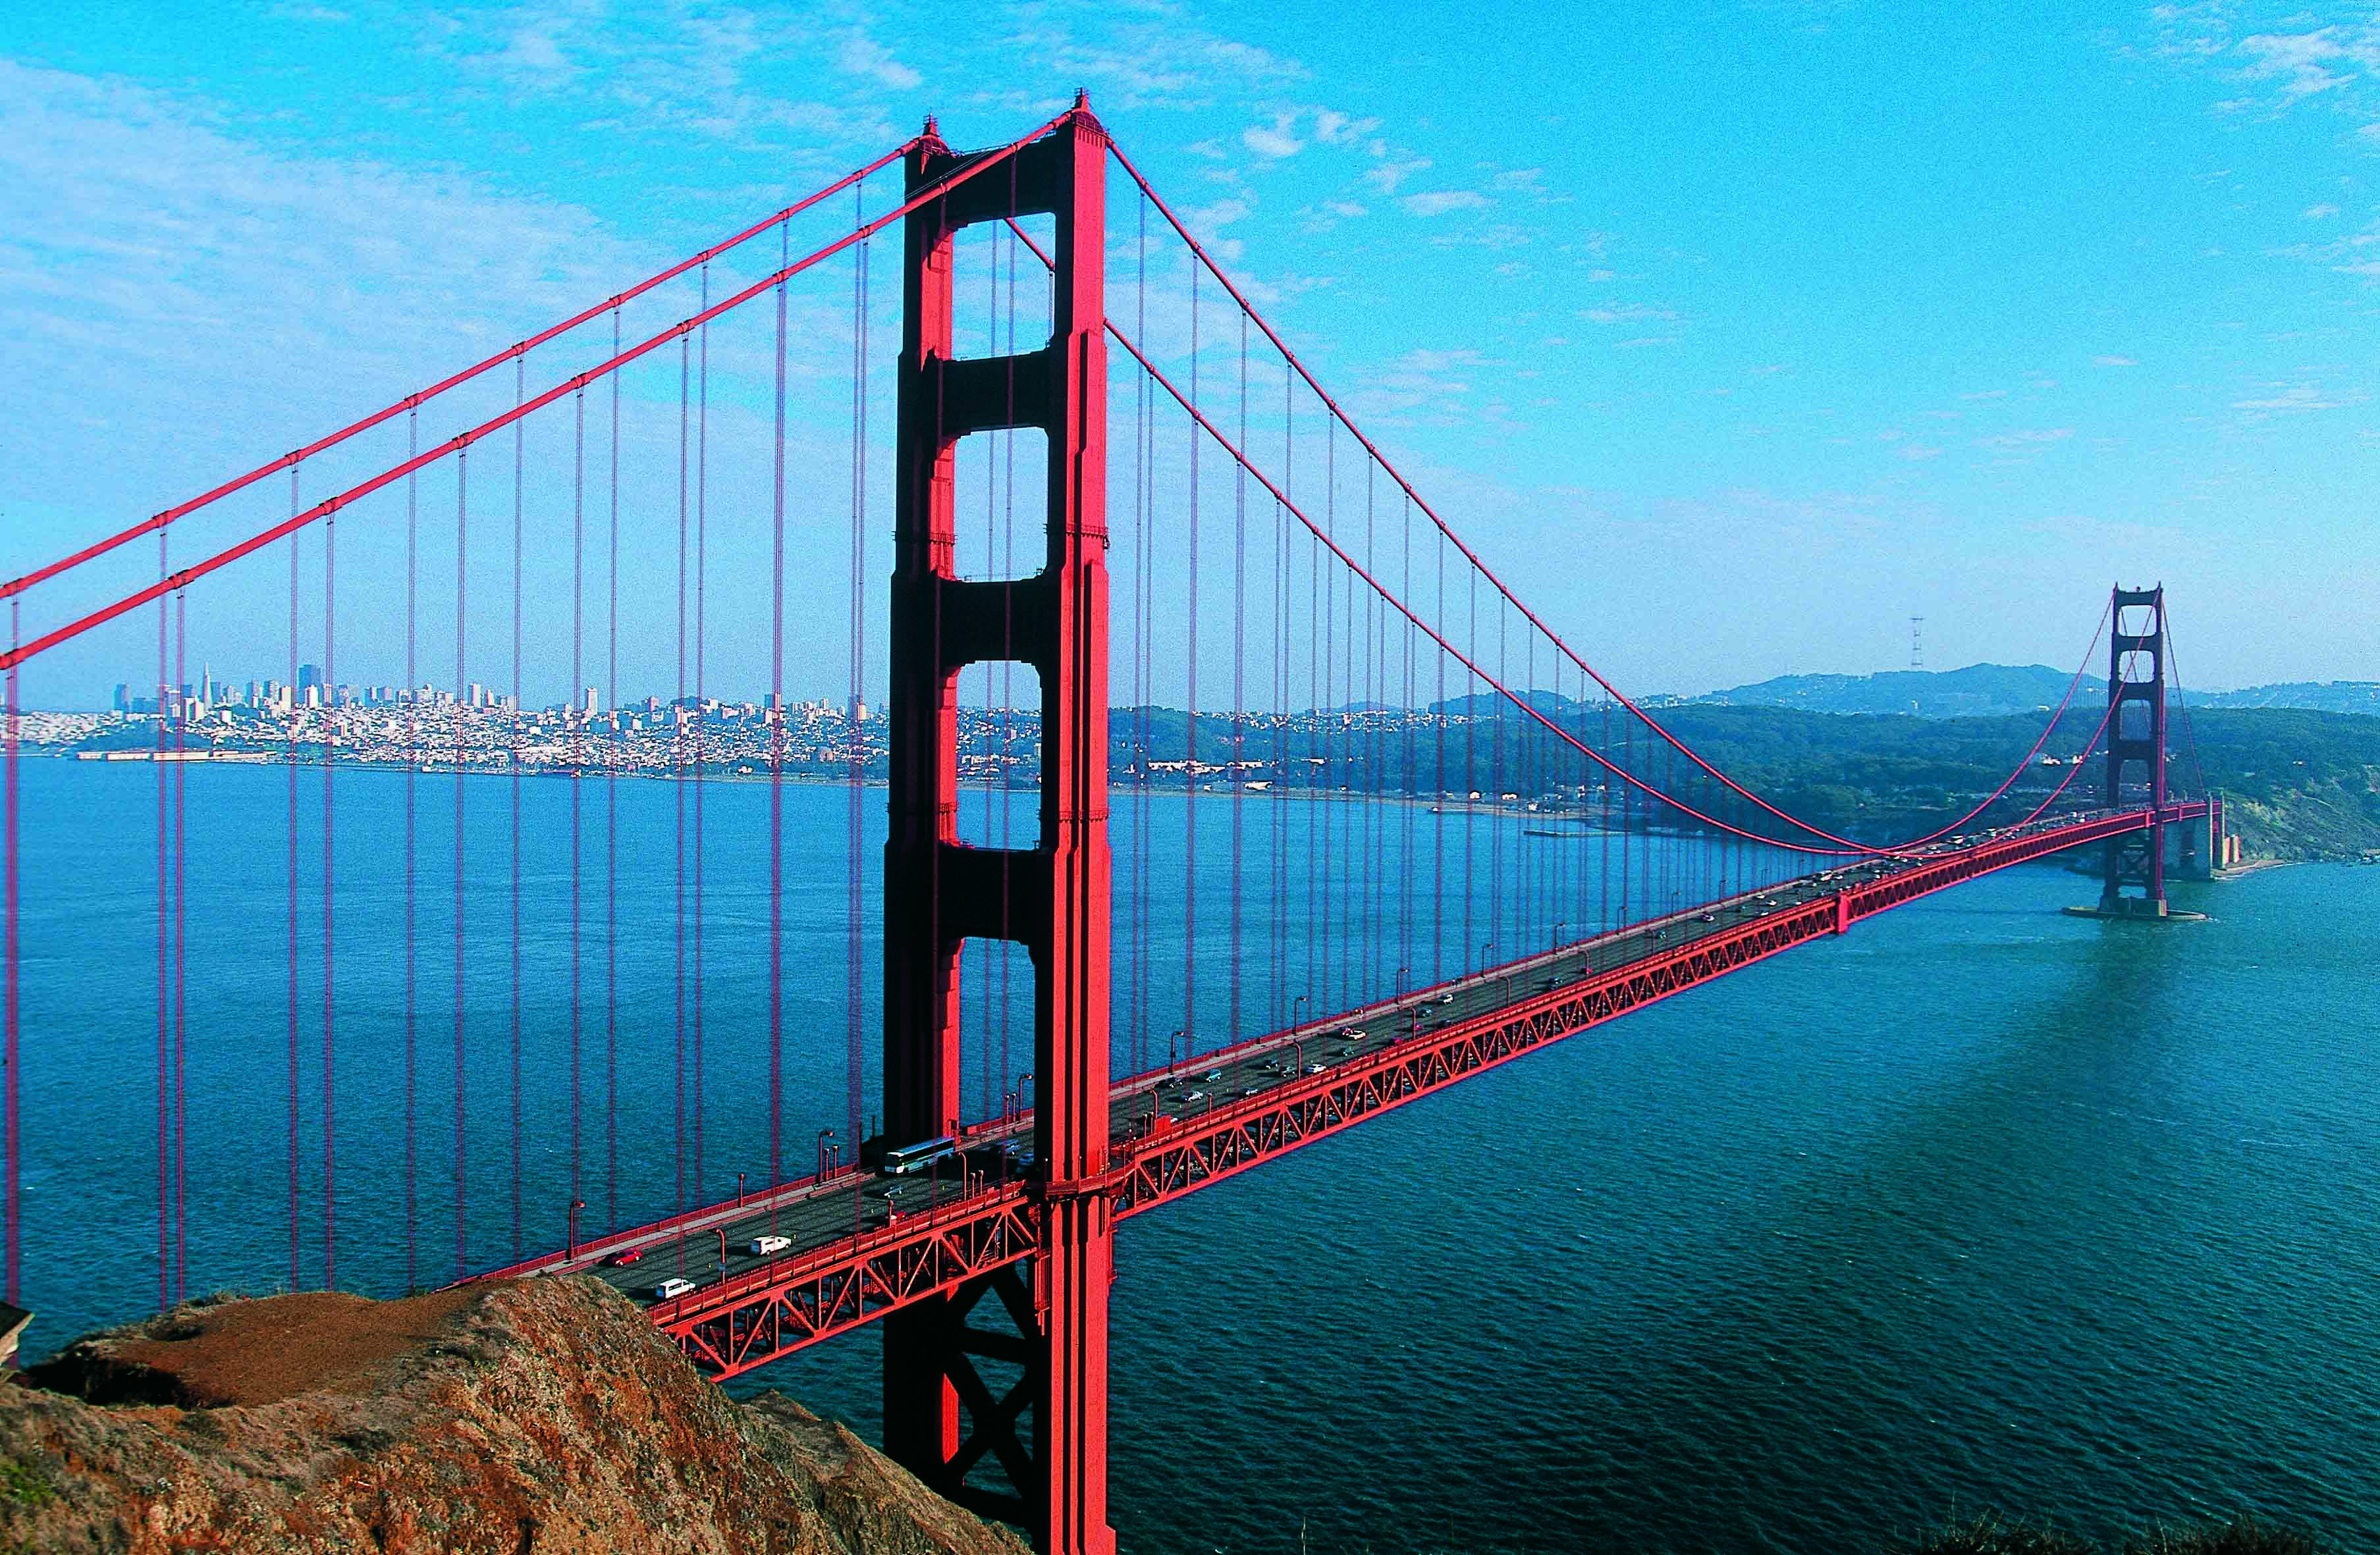 Beautiful Pictures Of The Golden Gate Bridge In San Francisco